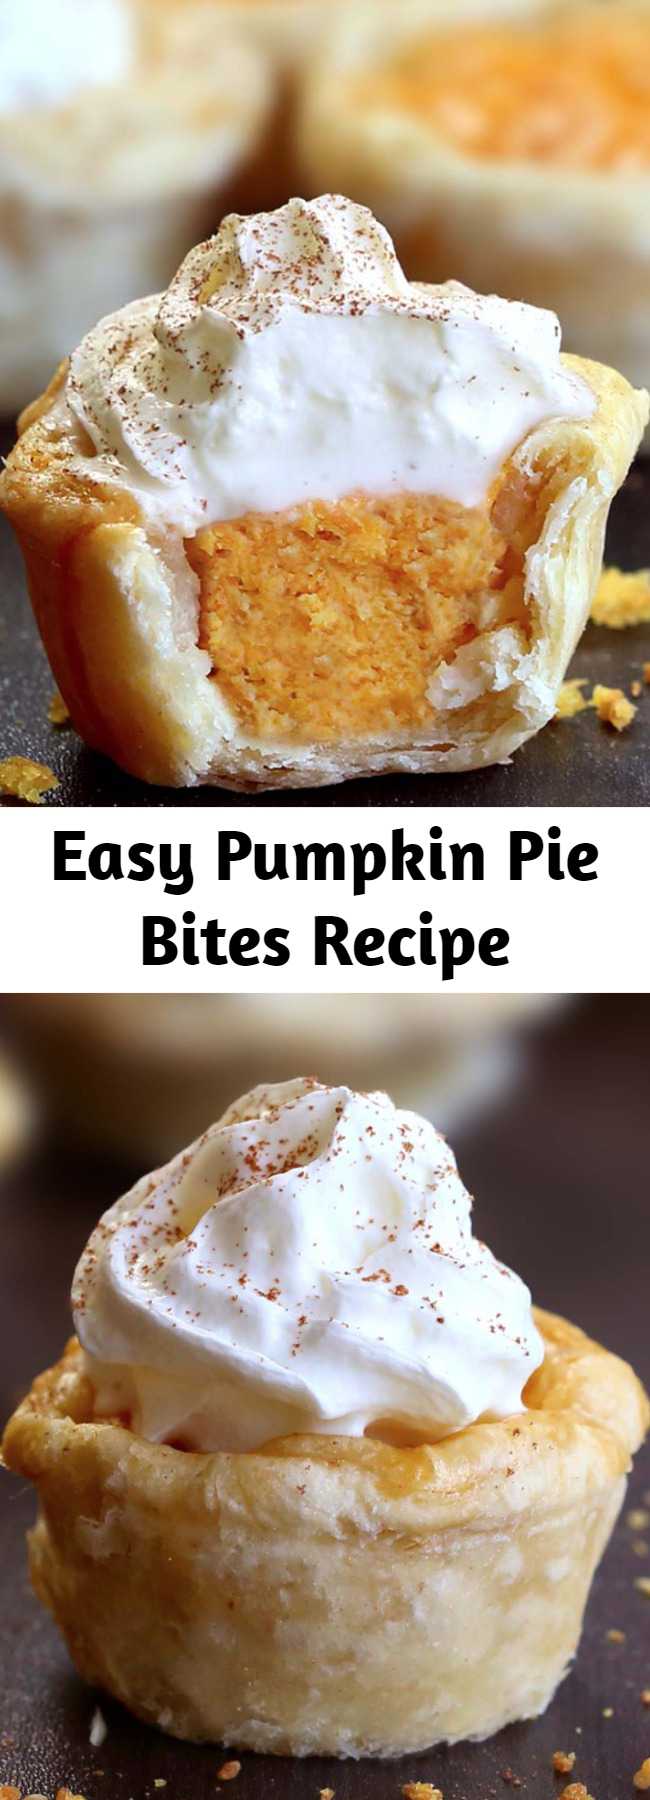 Easy Pumpkin Pie Bites Recipe - All the flavors of Homemade Pumpkin Pie packed into perfect portable fall dessert.